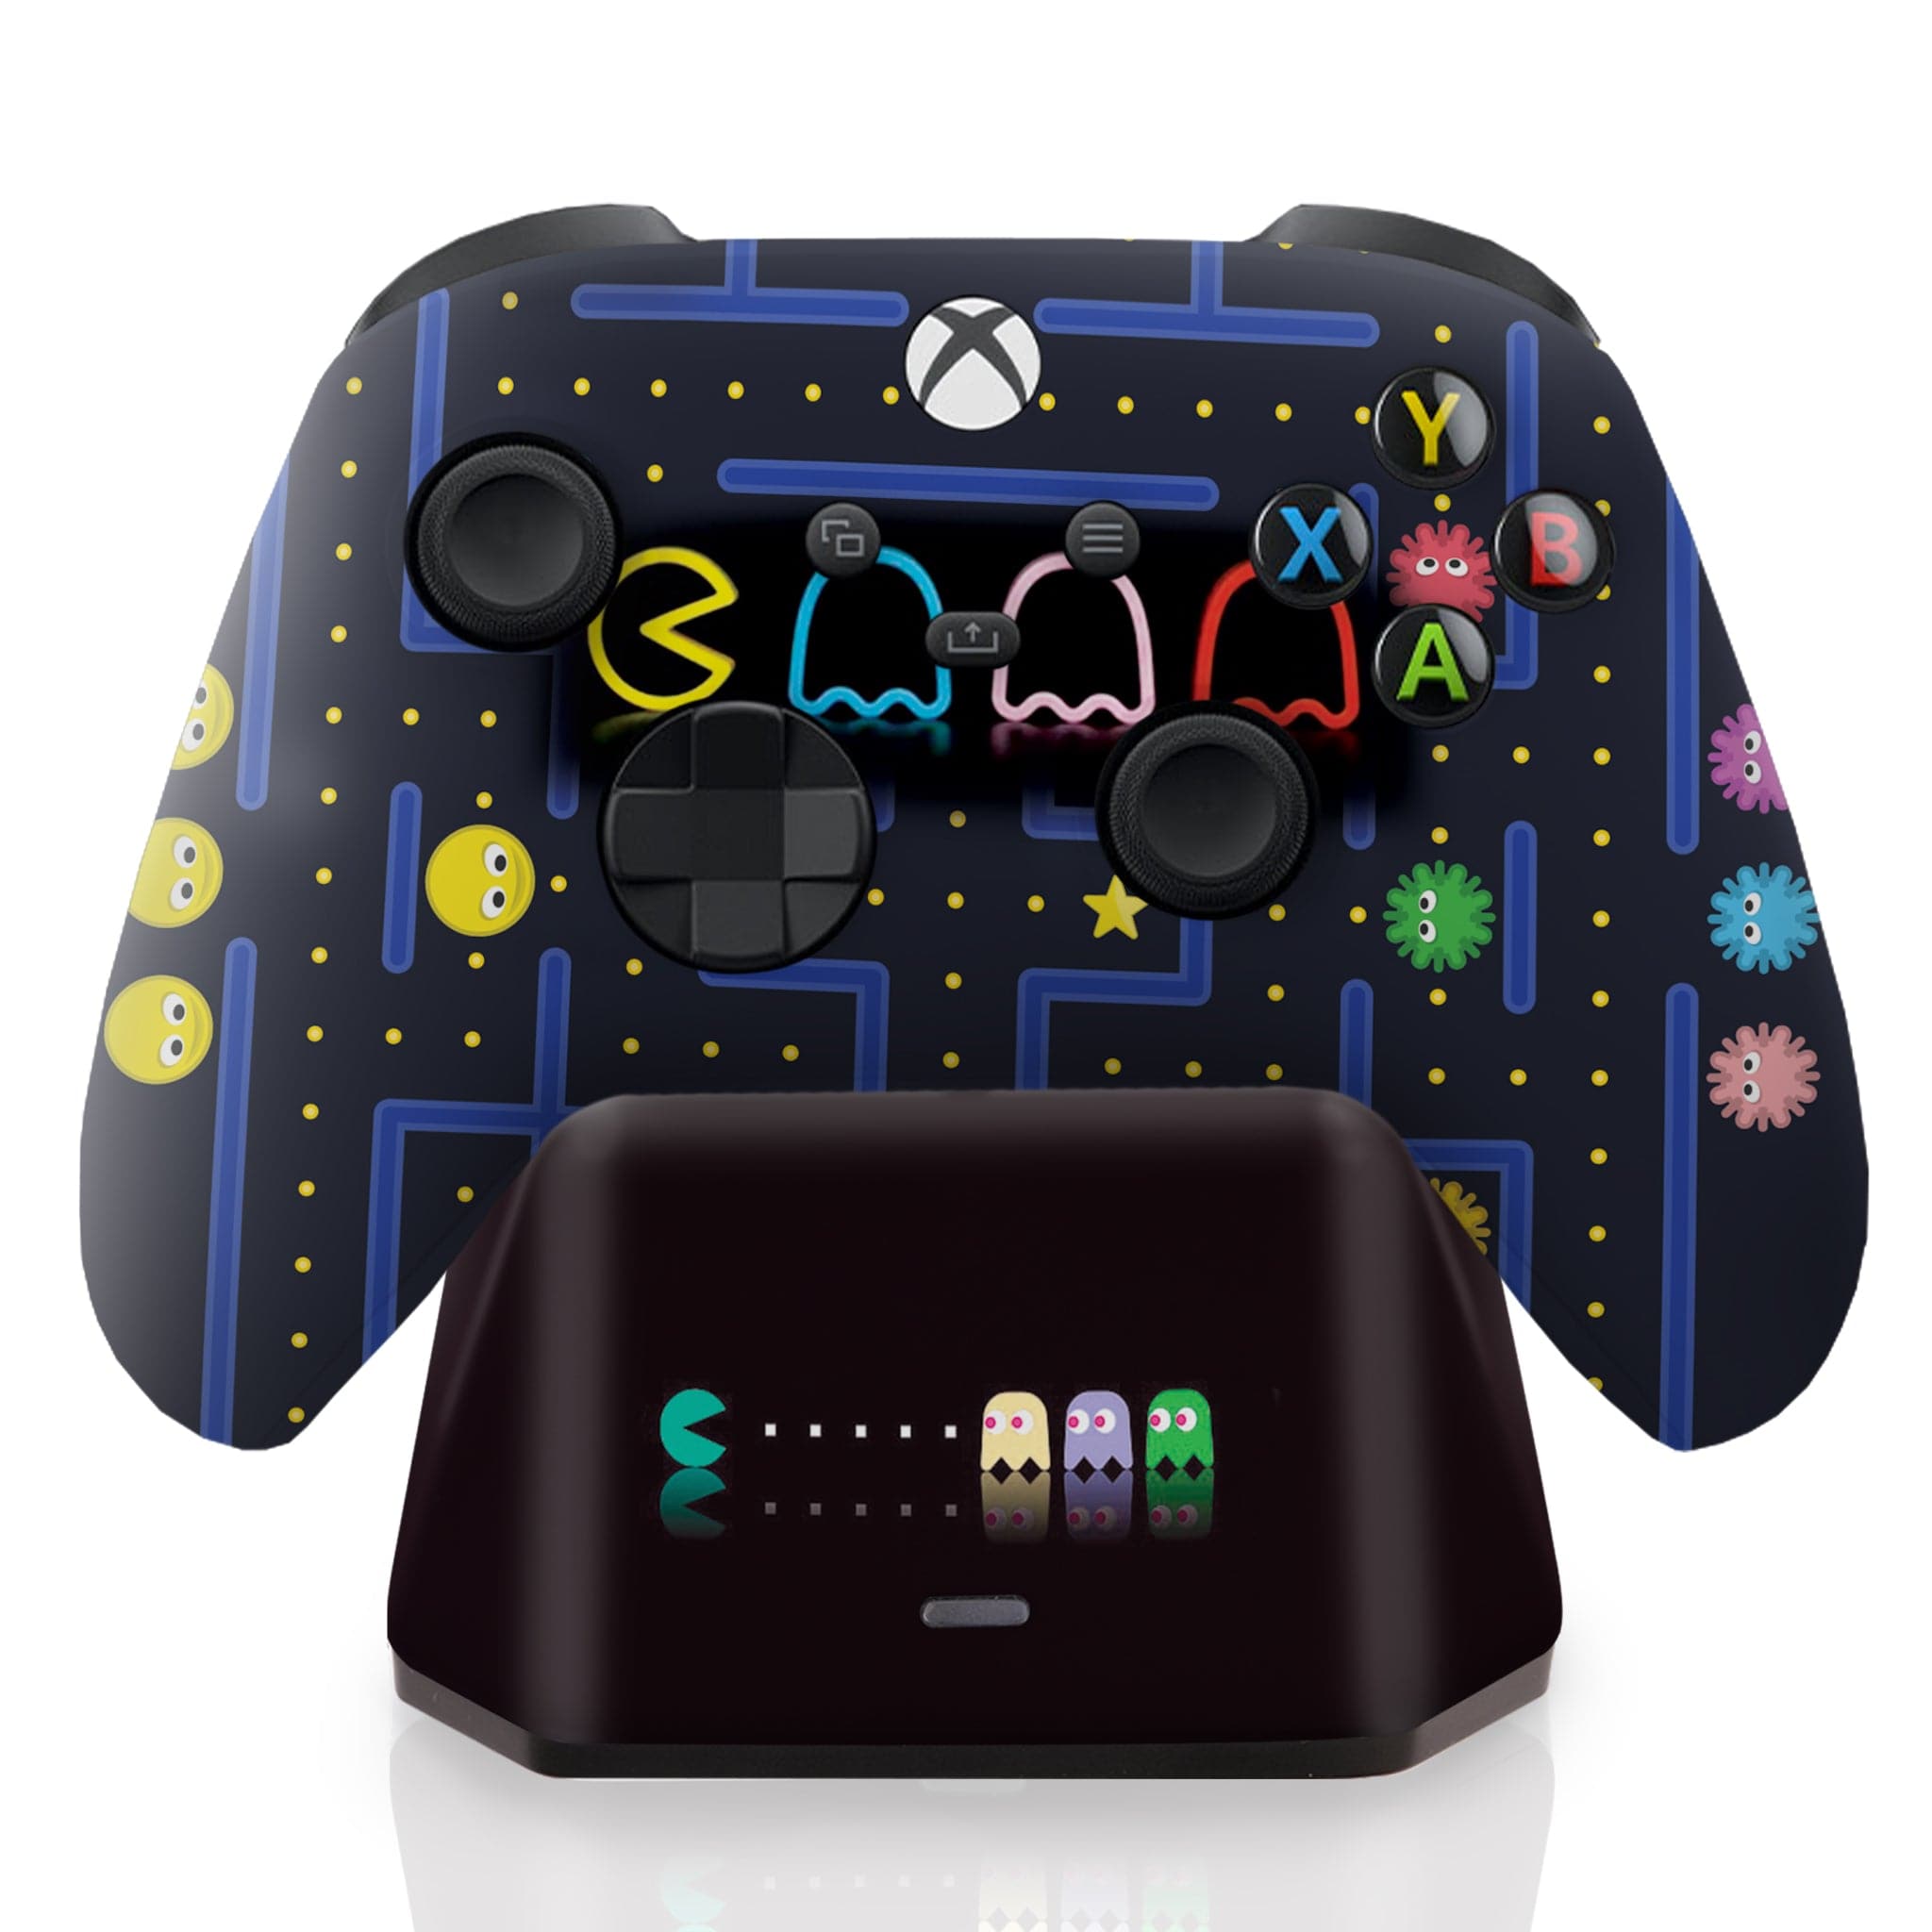 Pacman Inspired Xbox Series X Controller with Charging Station | Microsoft Xbox